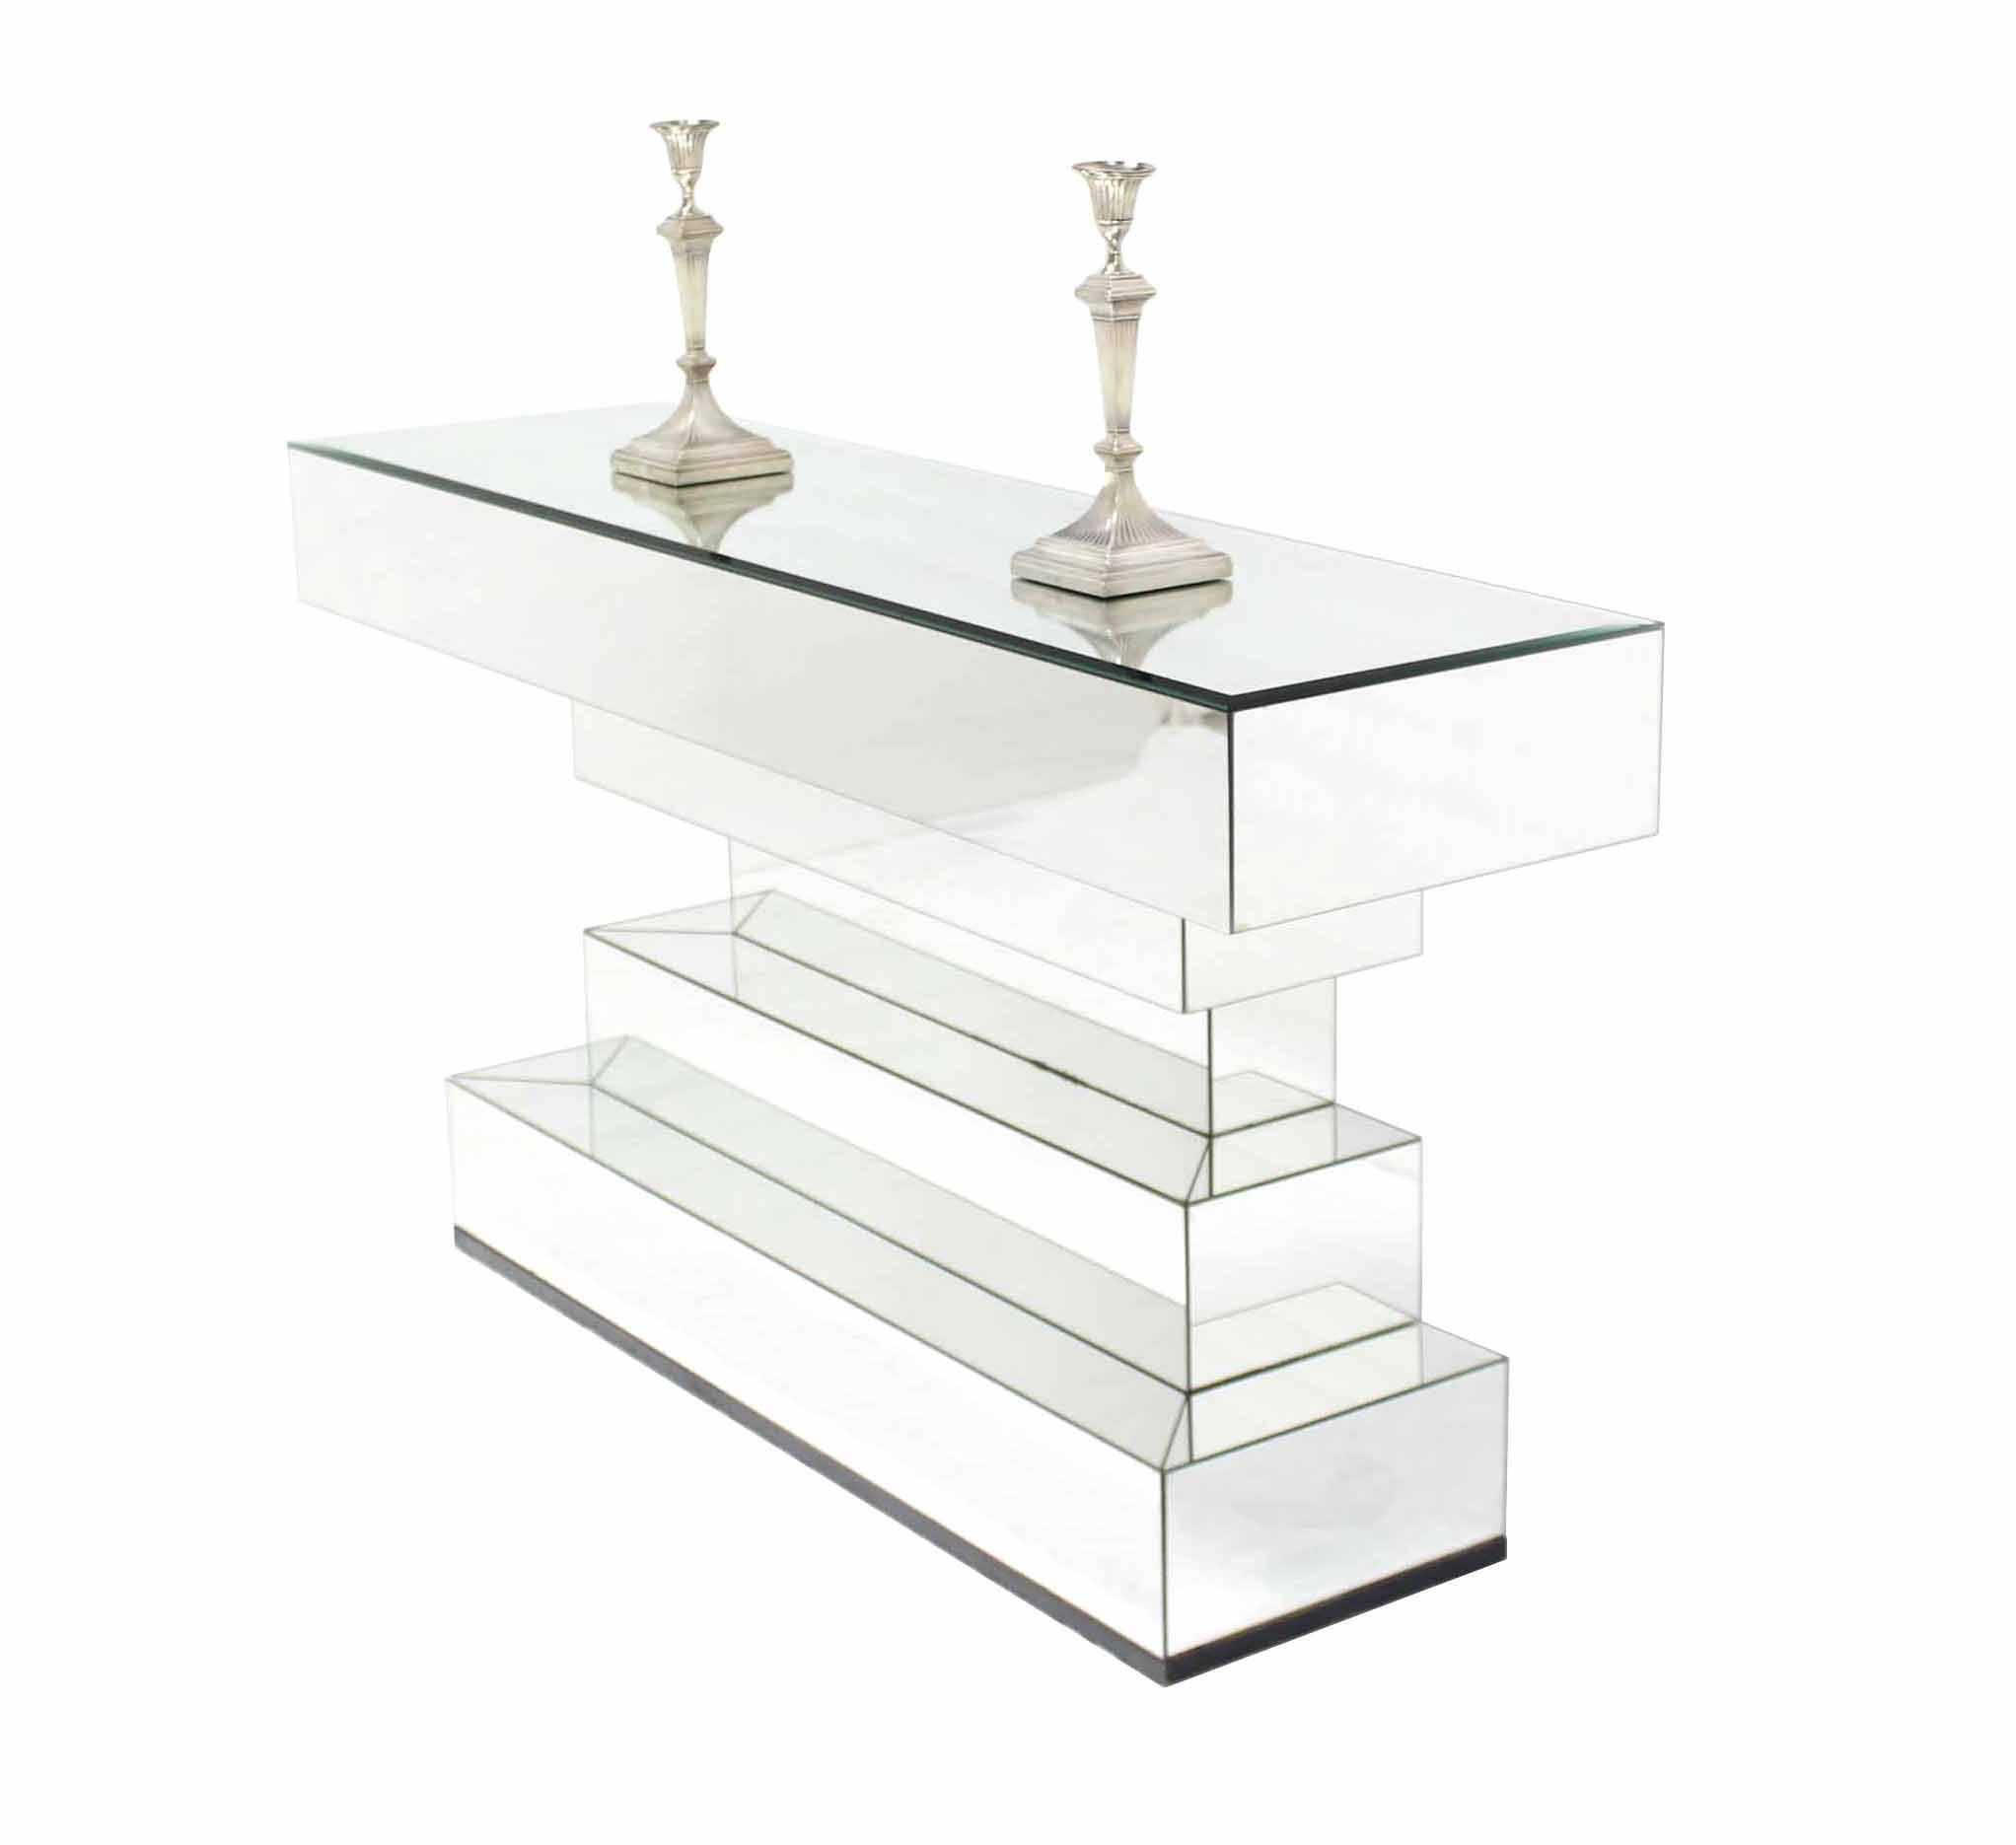 American Mirrored Step Base Console Table